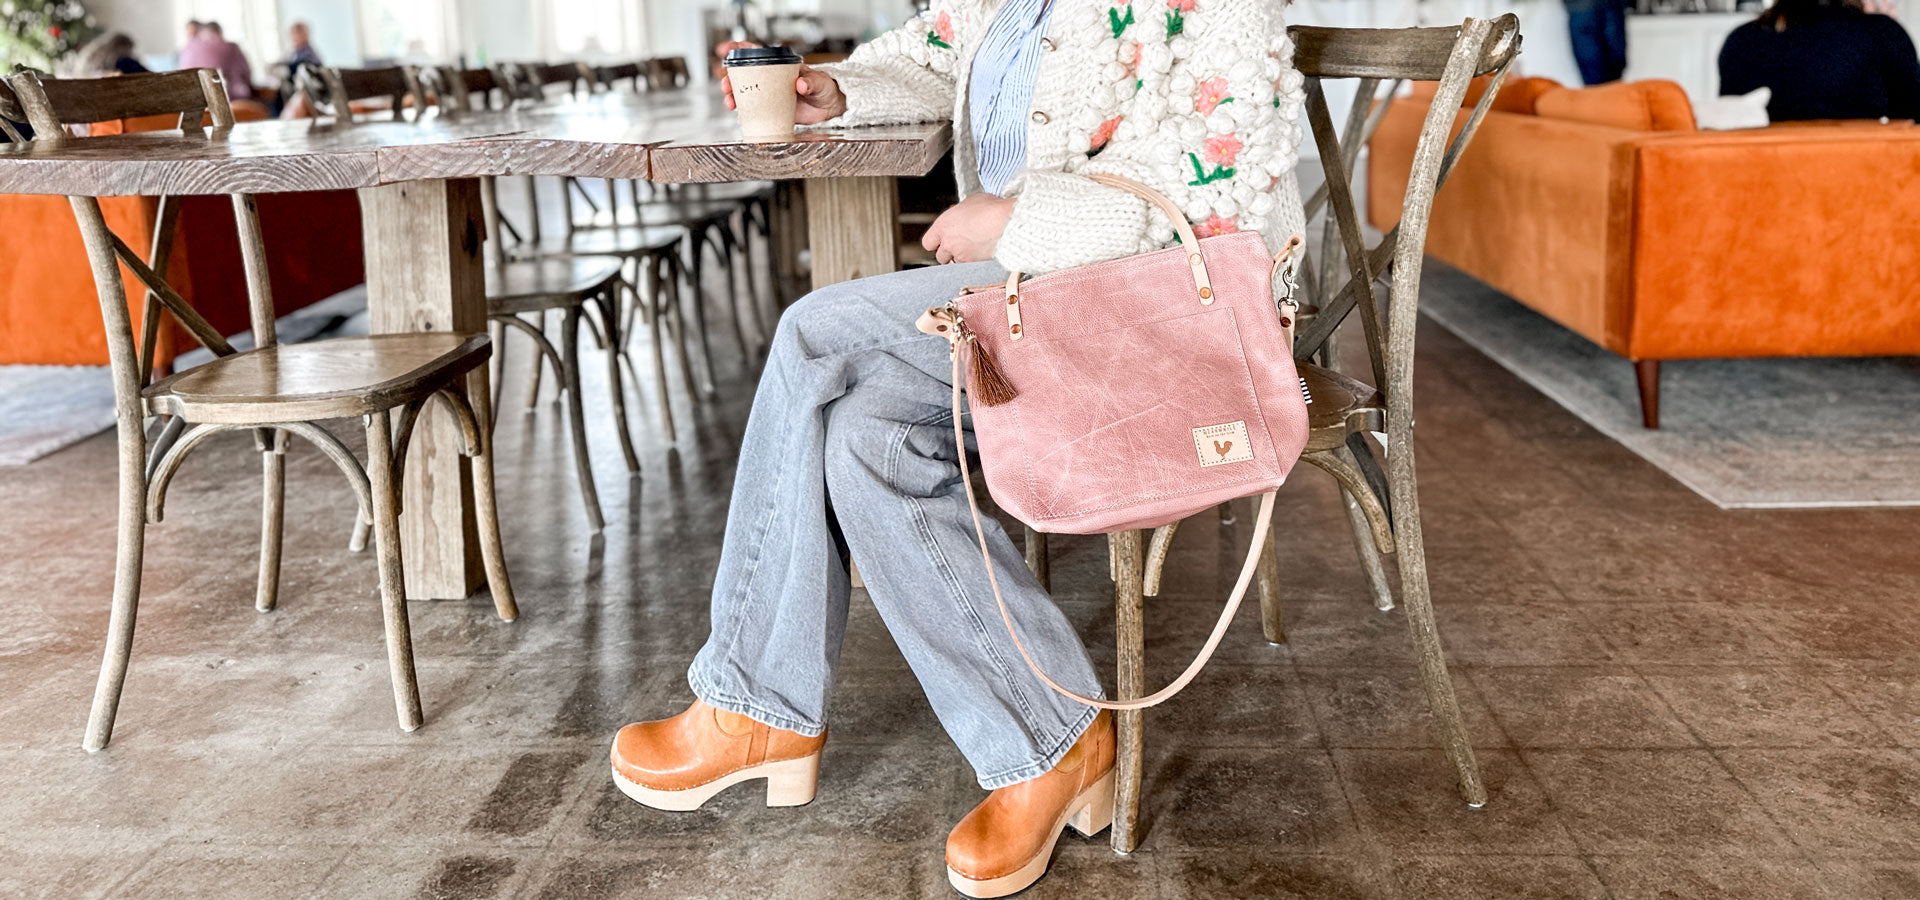 Girl sitting at table holding small rose pink leather handbag